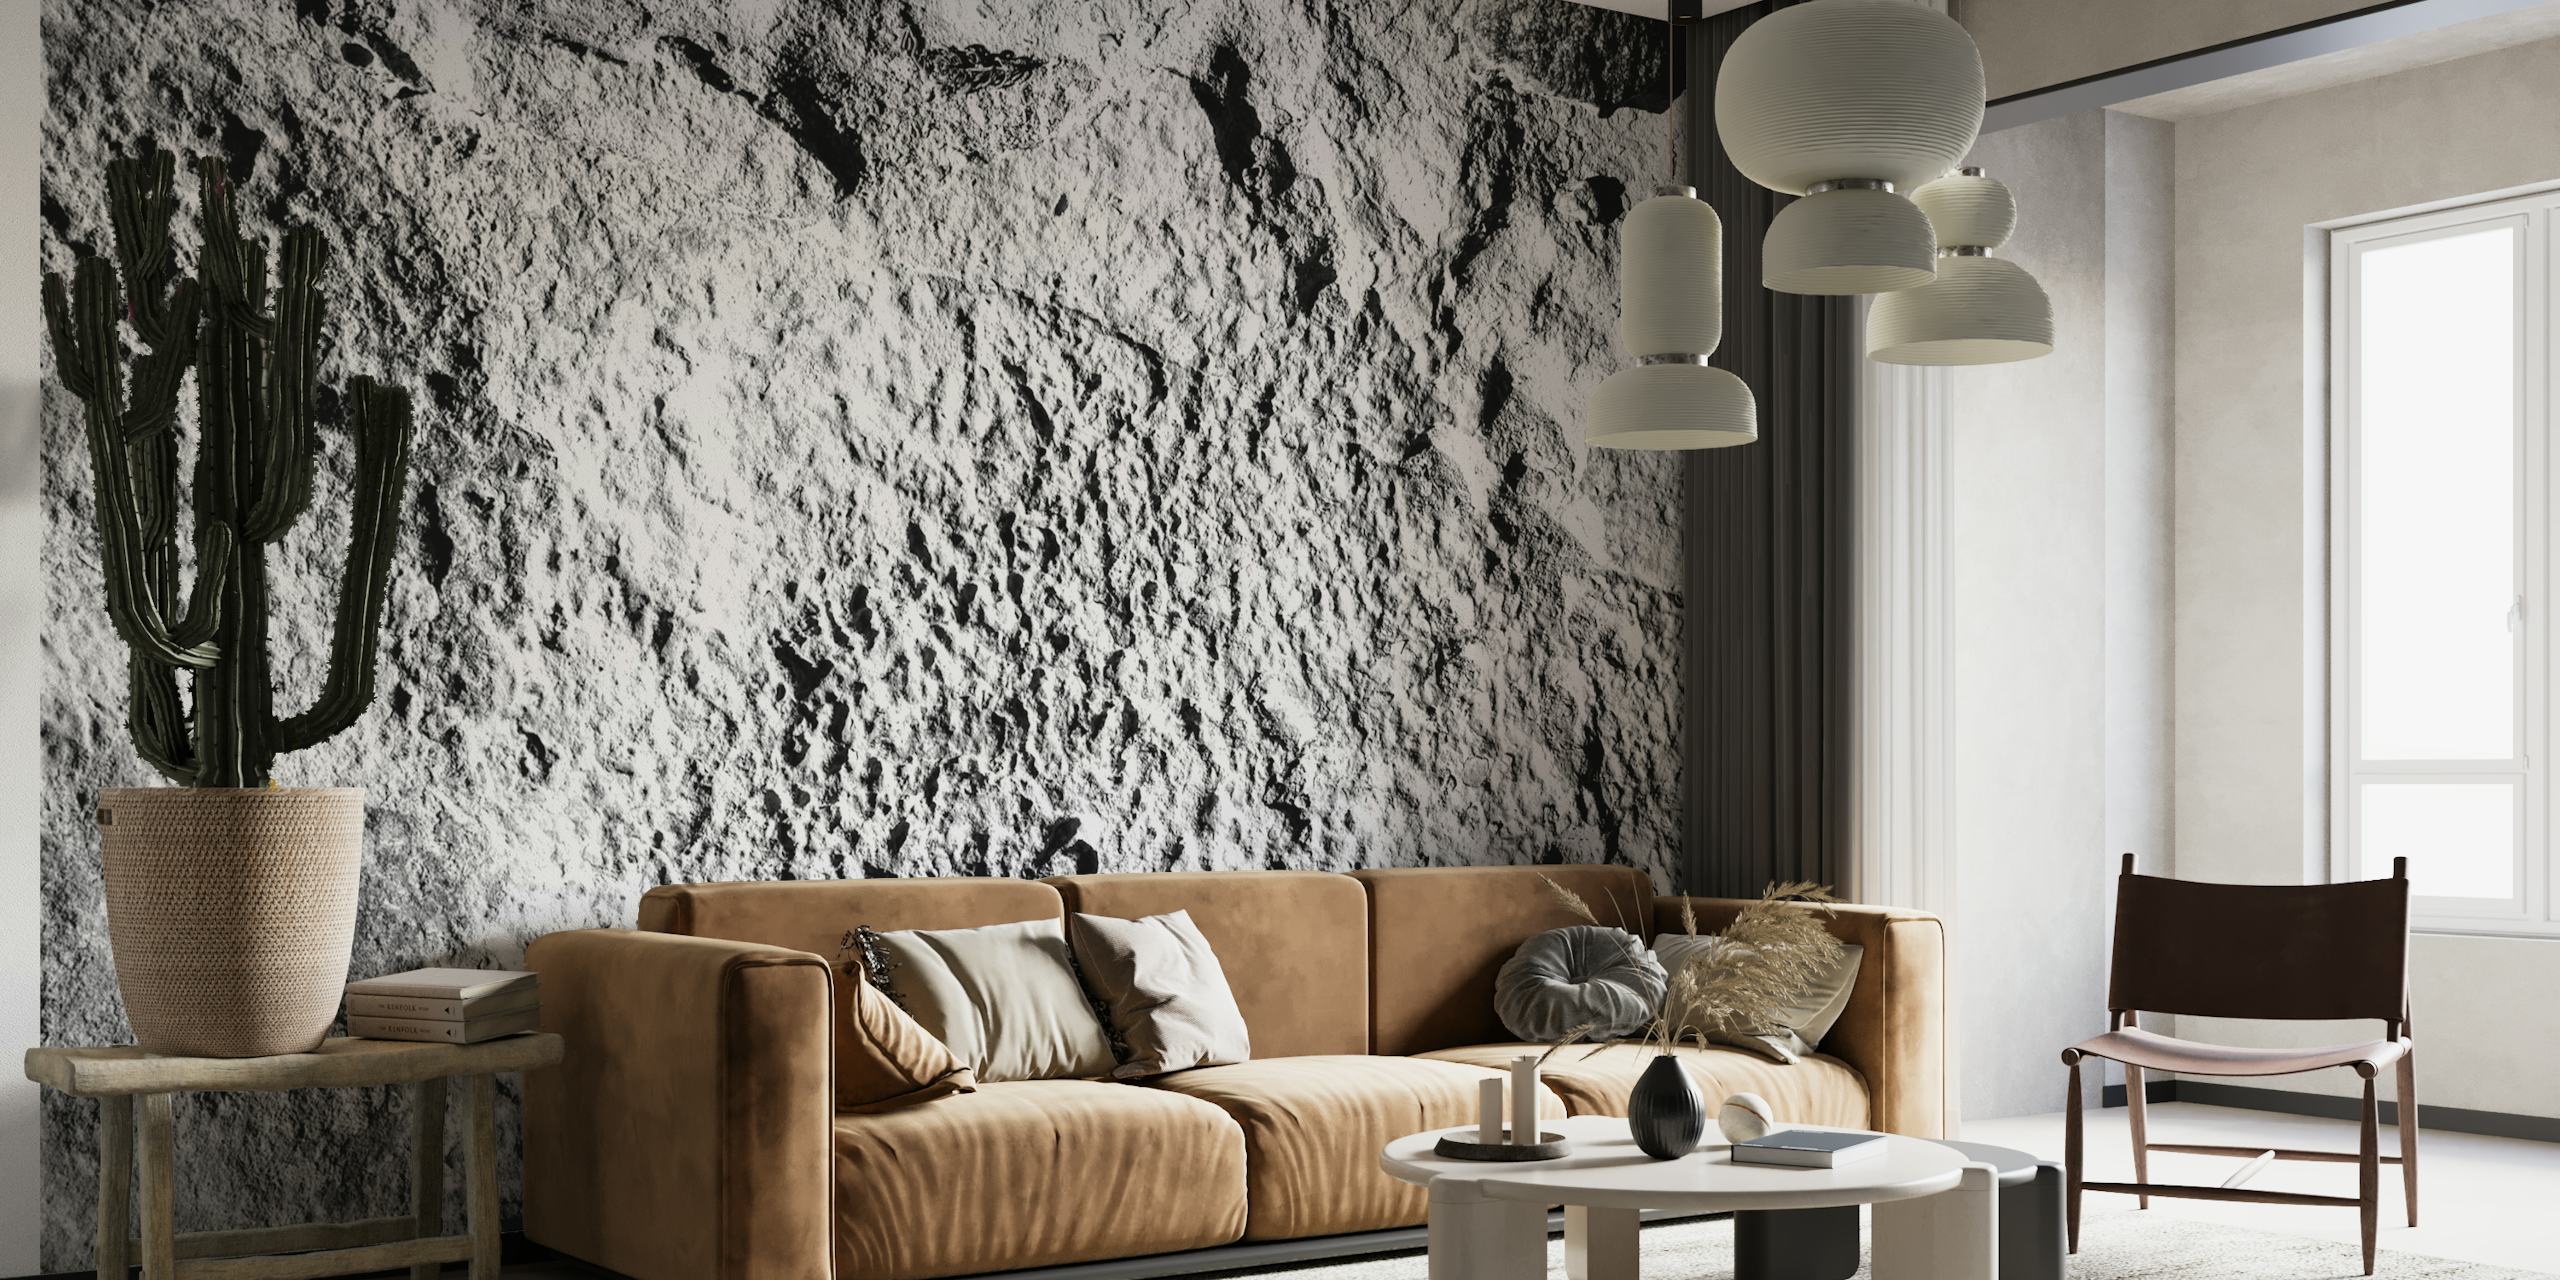 Abstract monochrome wall mural with intricate textures and shadows